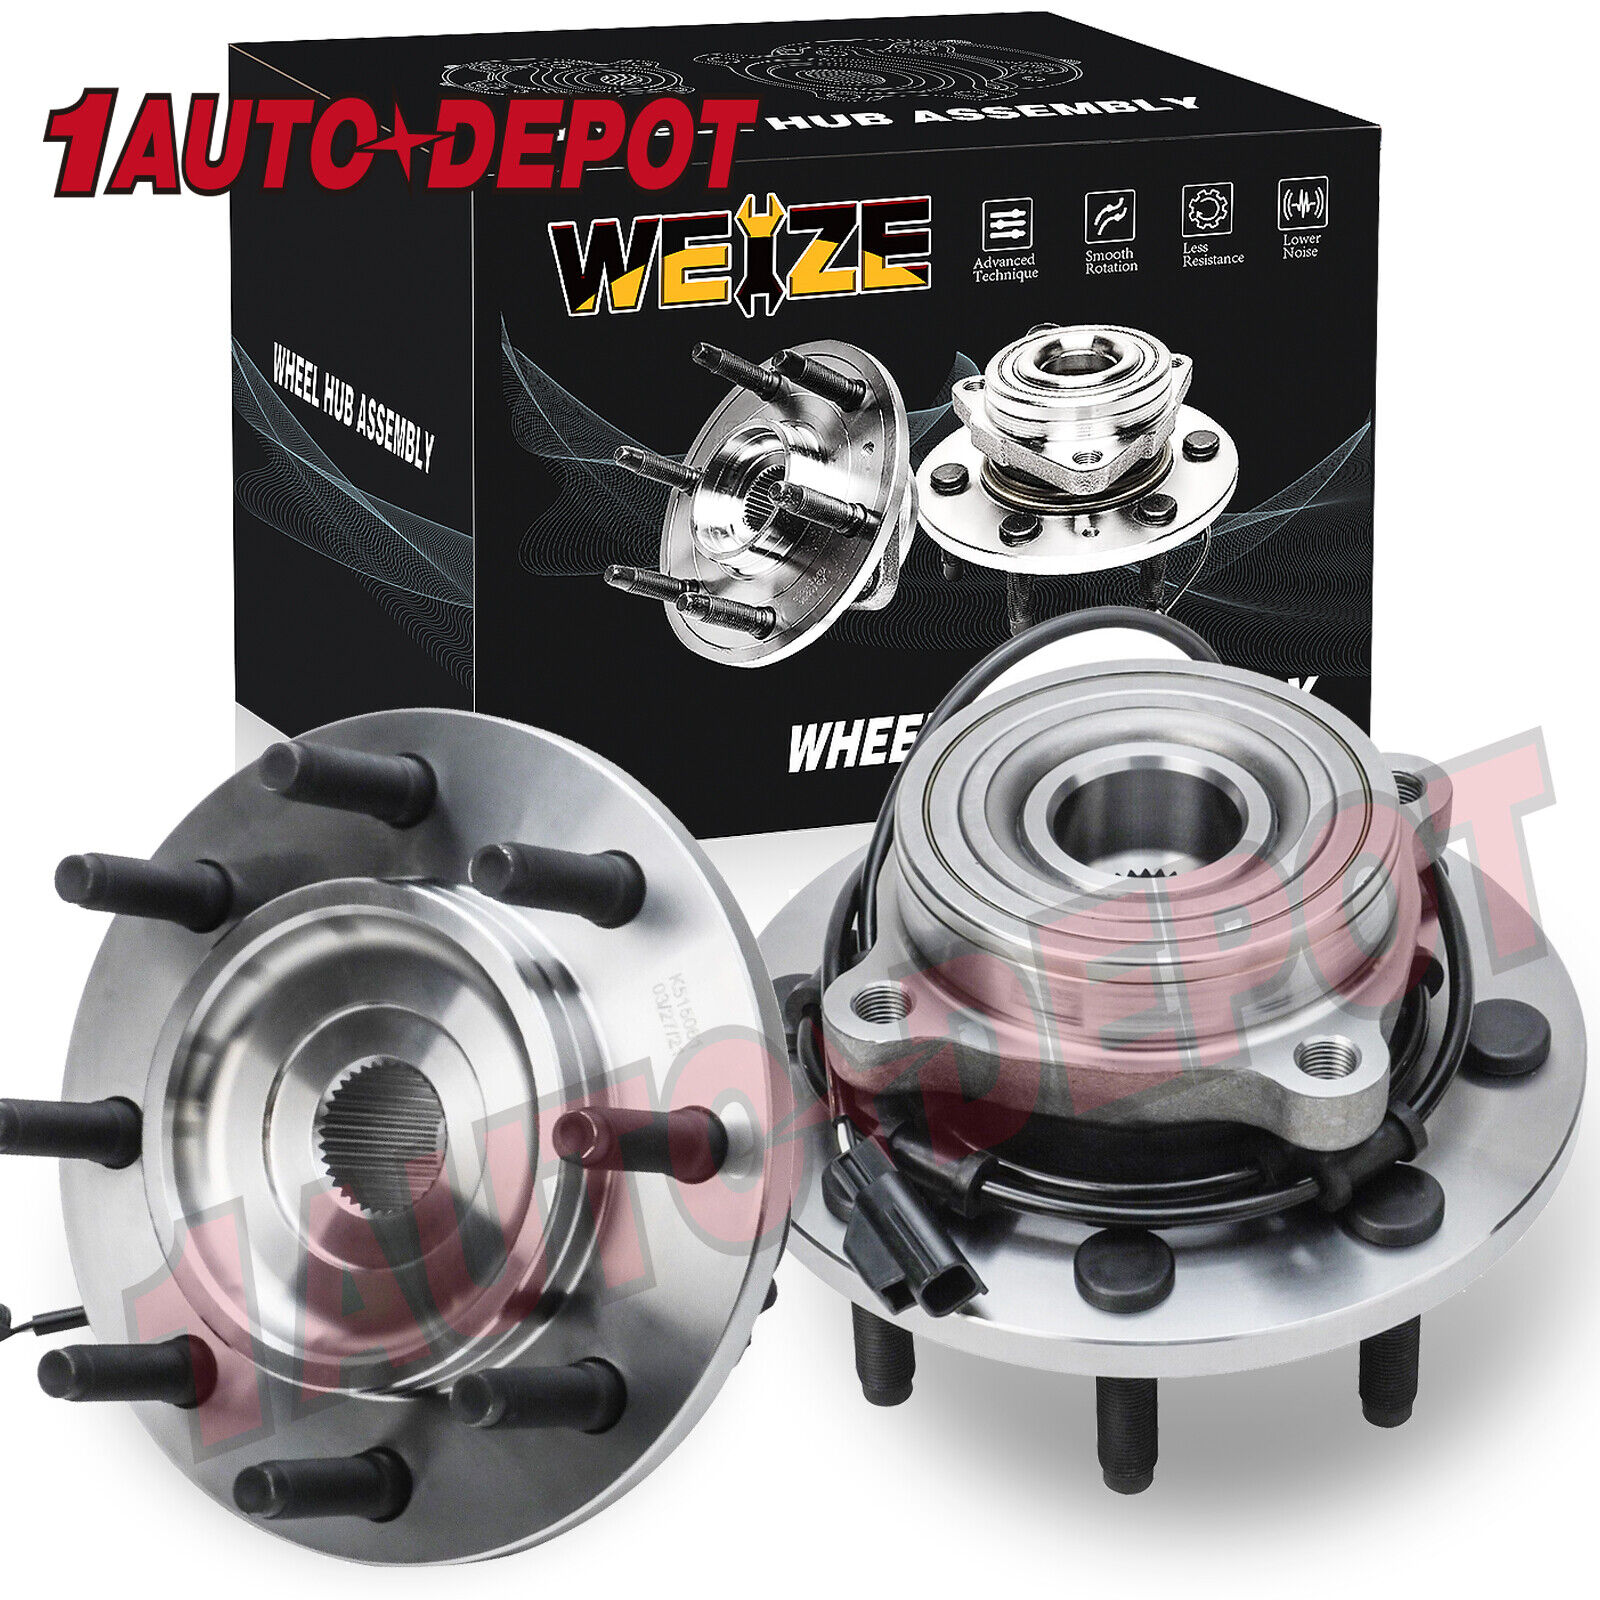 4WD Front Wheel Bearing and Hubs for Dodge Ram 2500 3500 2003 2004 2005 8Lug x2